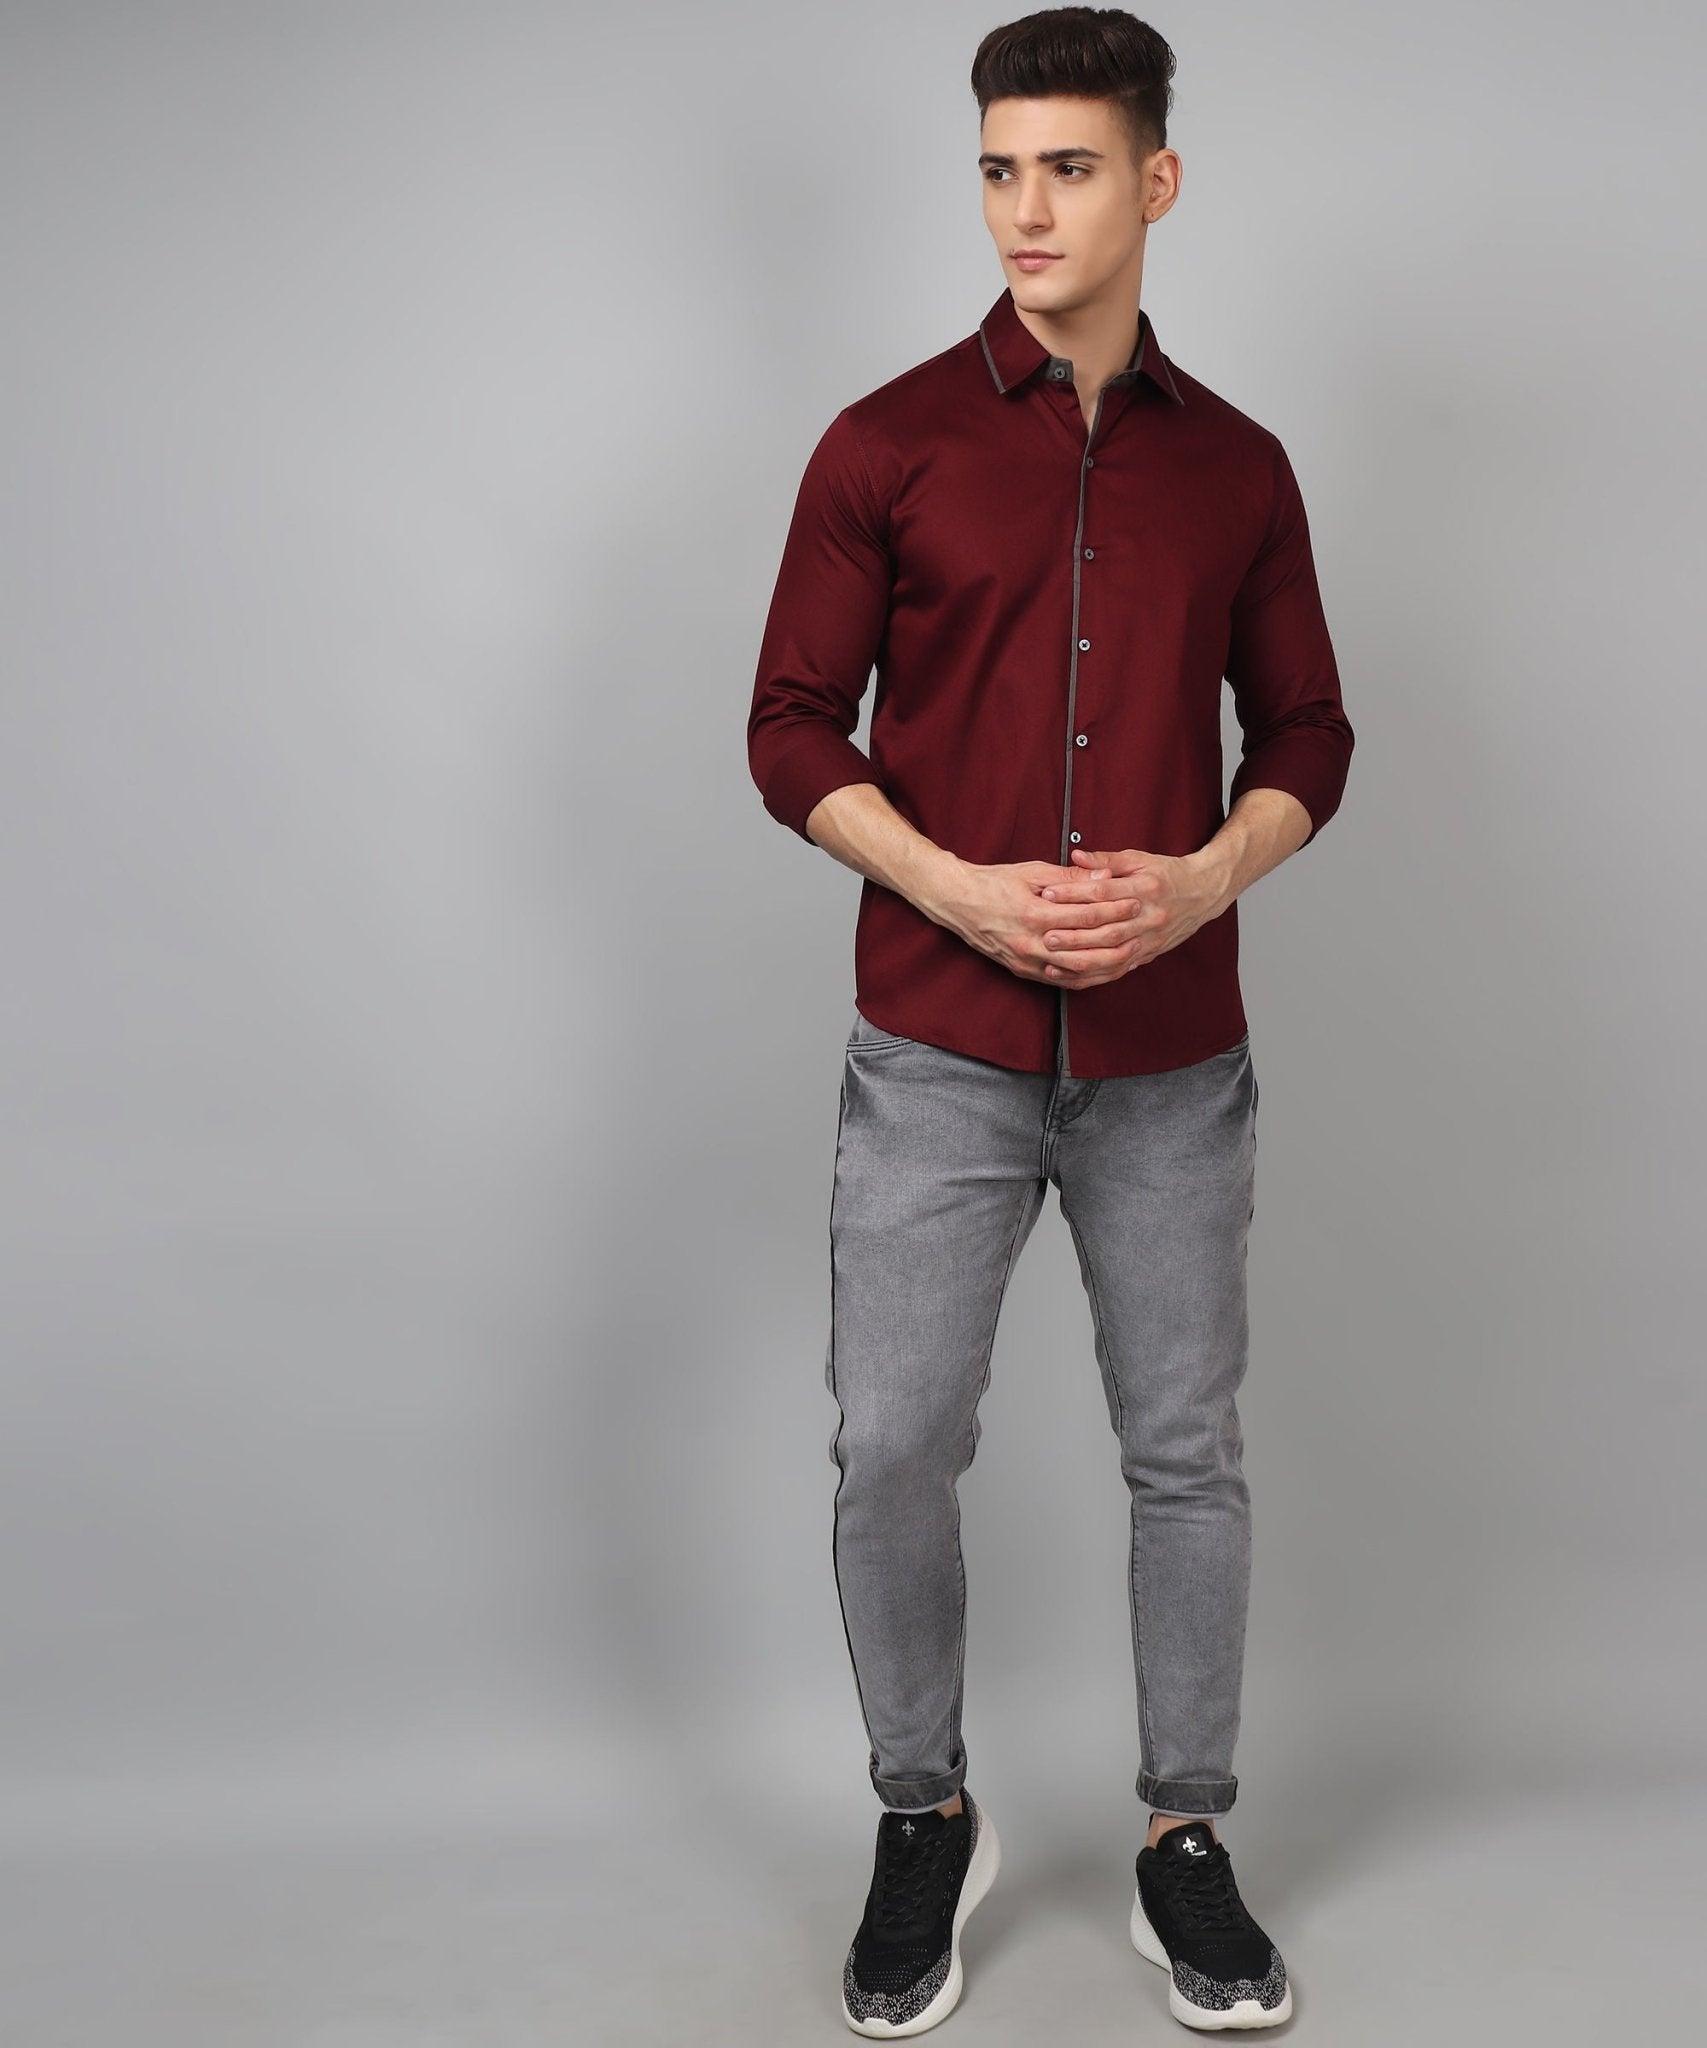 Luxurious Partywear TryBuy Premium WineRed Cotton Casual Solid Shirt for Men - TryBuy® USA🇺🇸